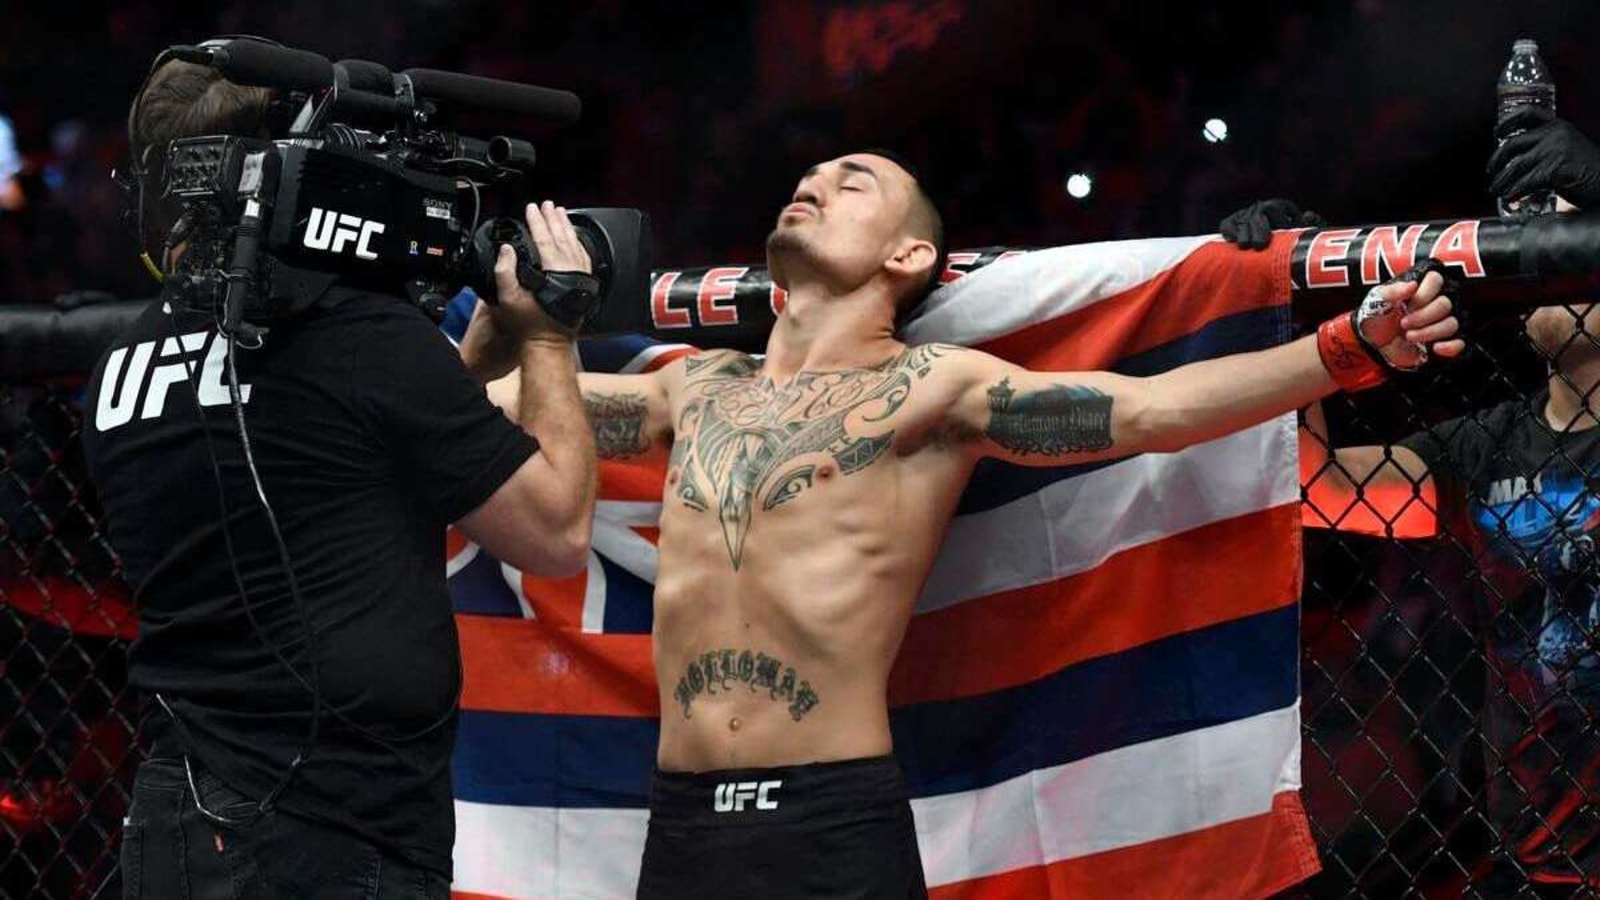 UFC Fight Night: 445 strikes landed in one fight- Max Holloway is making his hands do the talking | Hindustan Times